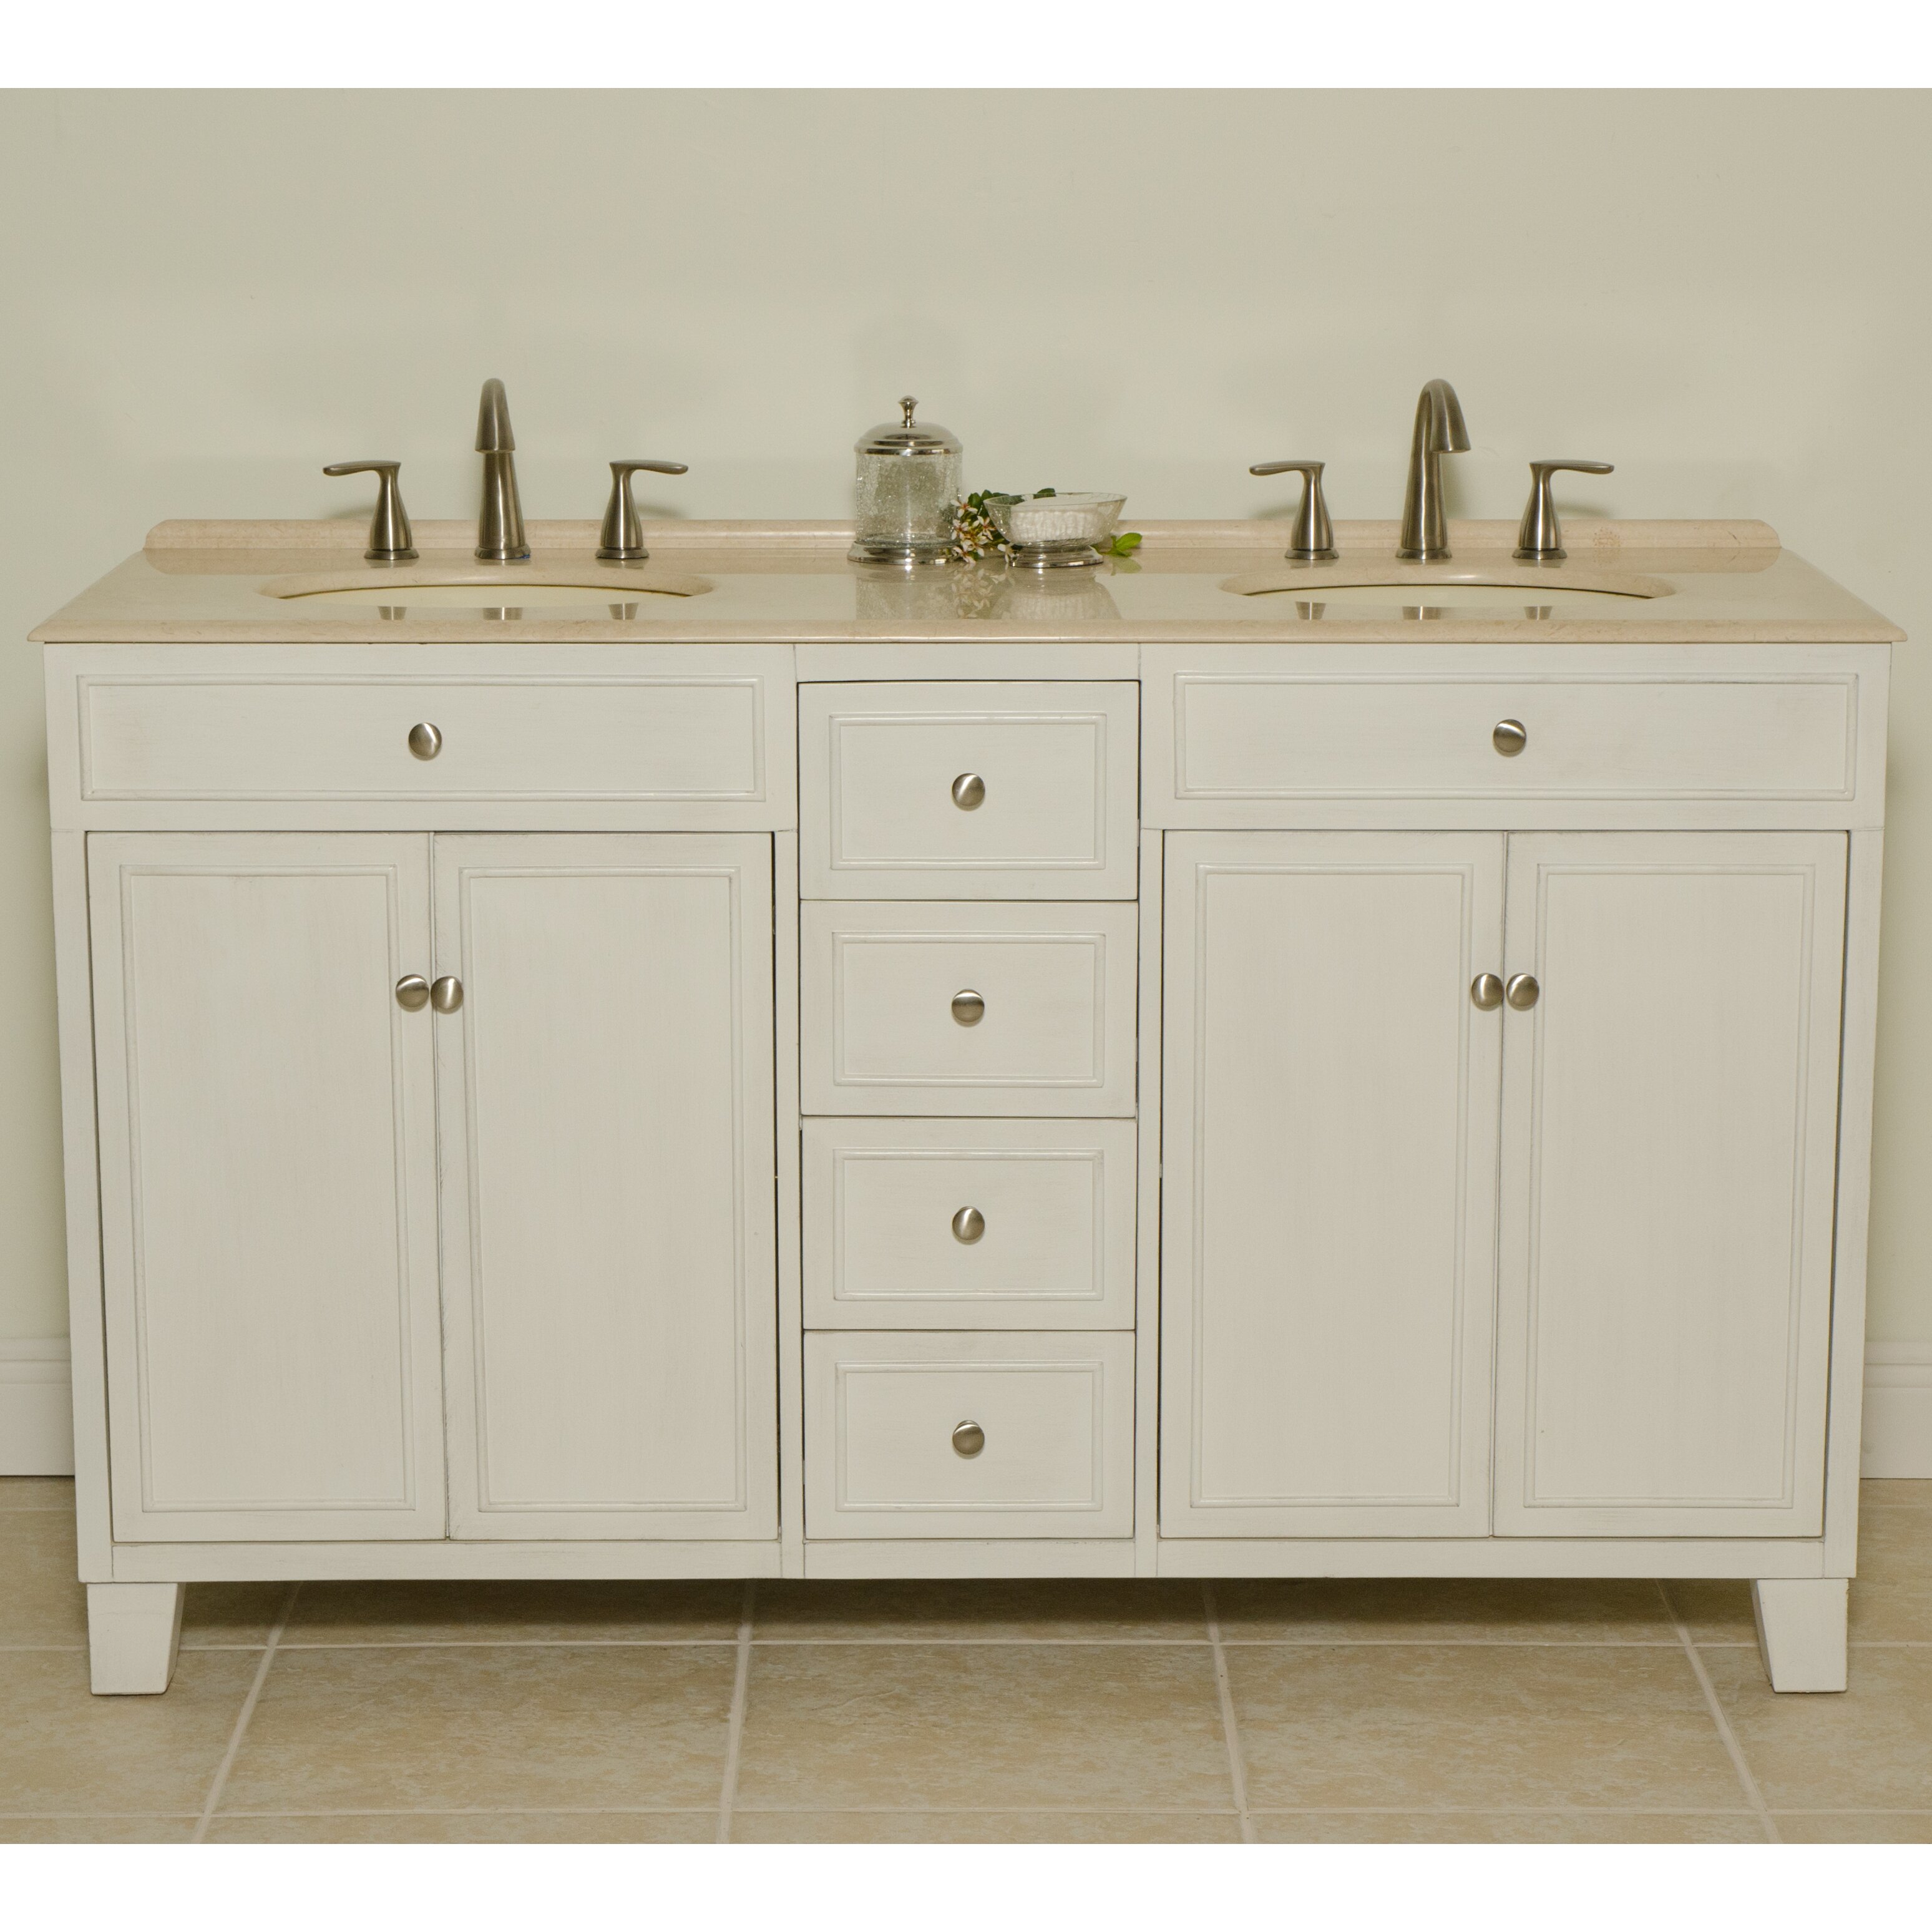 Janet 60quot; Double Bathroom Vanity Set by Bamp;I Direct Imports